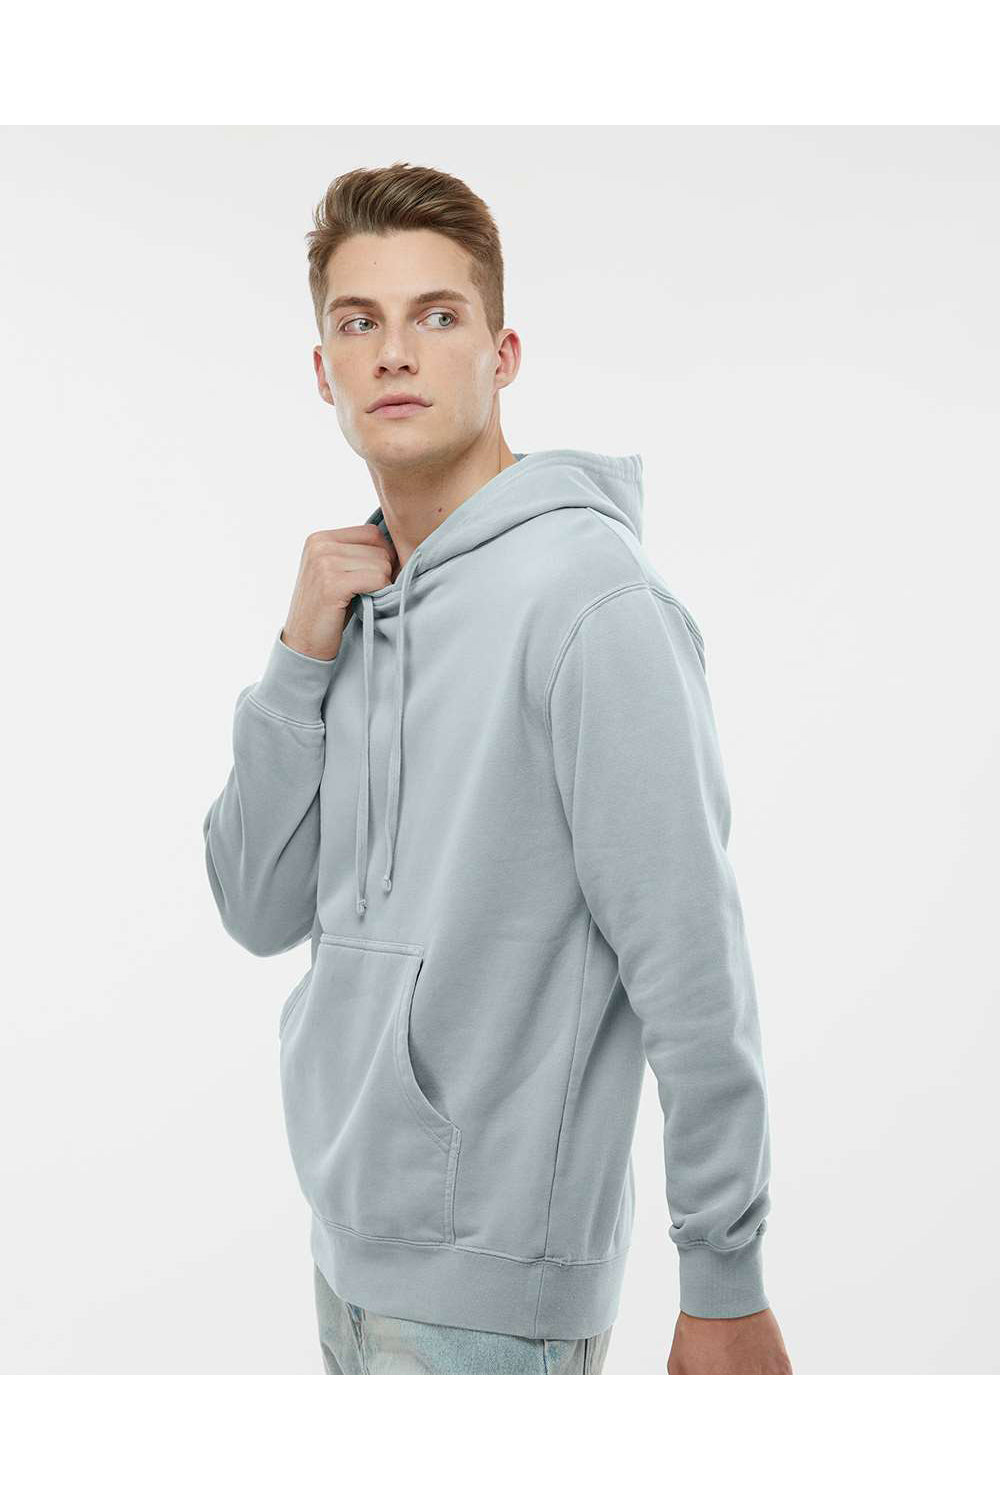 Independent Trading Co. PRM4500 Mens Pigment Dyed Hooded Sweatshirt Hoodie Sage Green Model Side